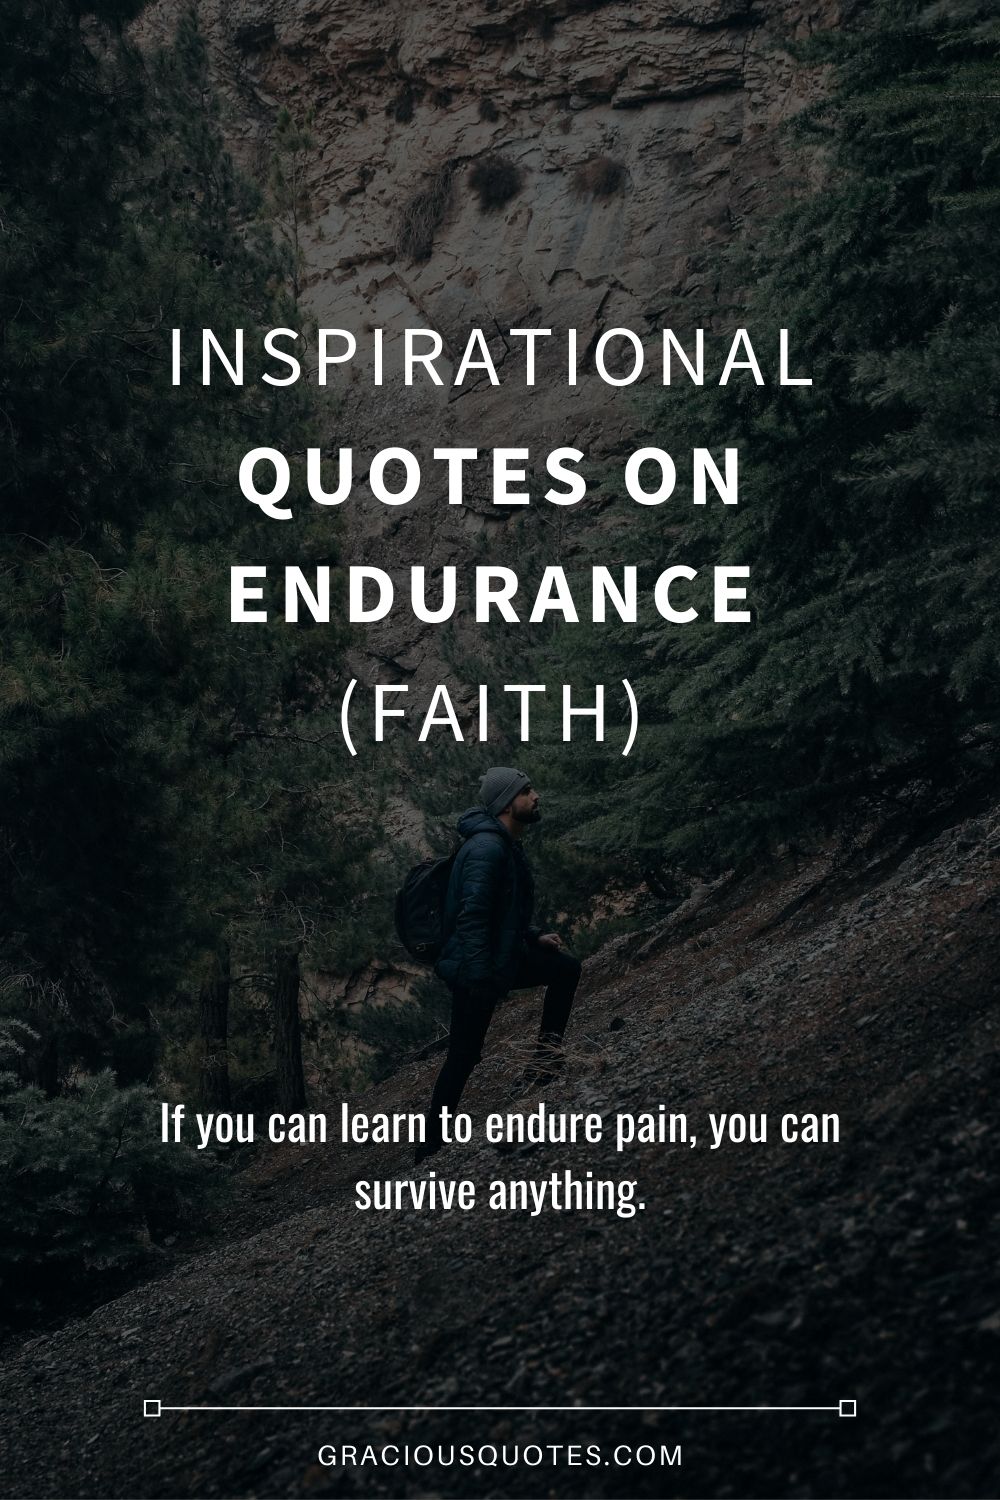 Inspirational Quotes on Endurance (FAITH) - Gracious Quotes